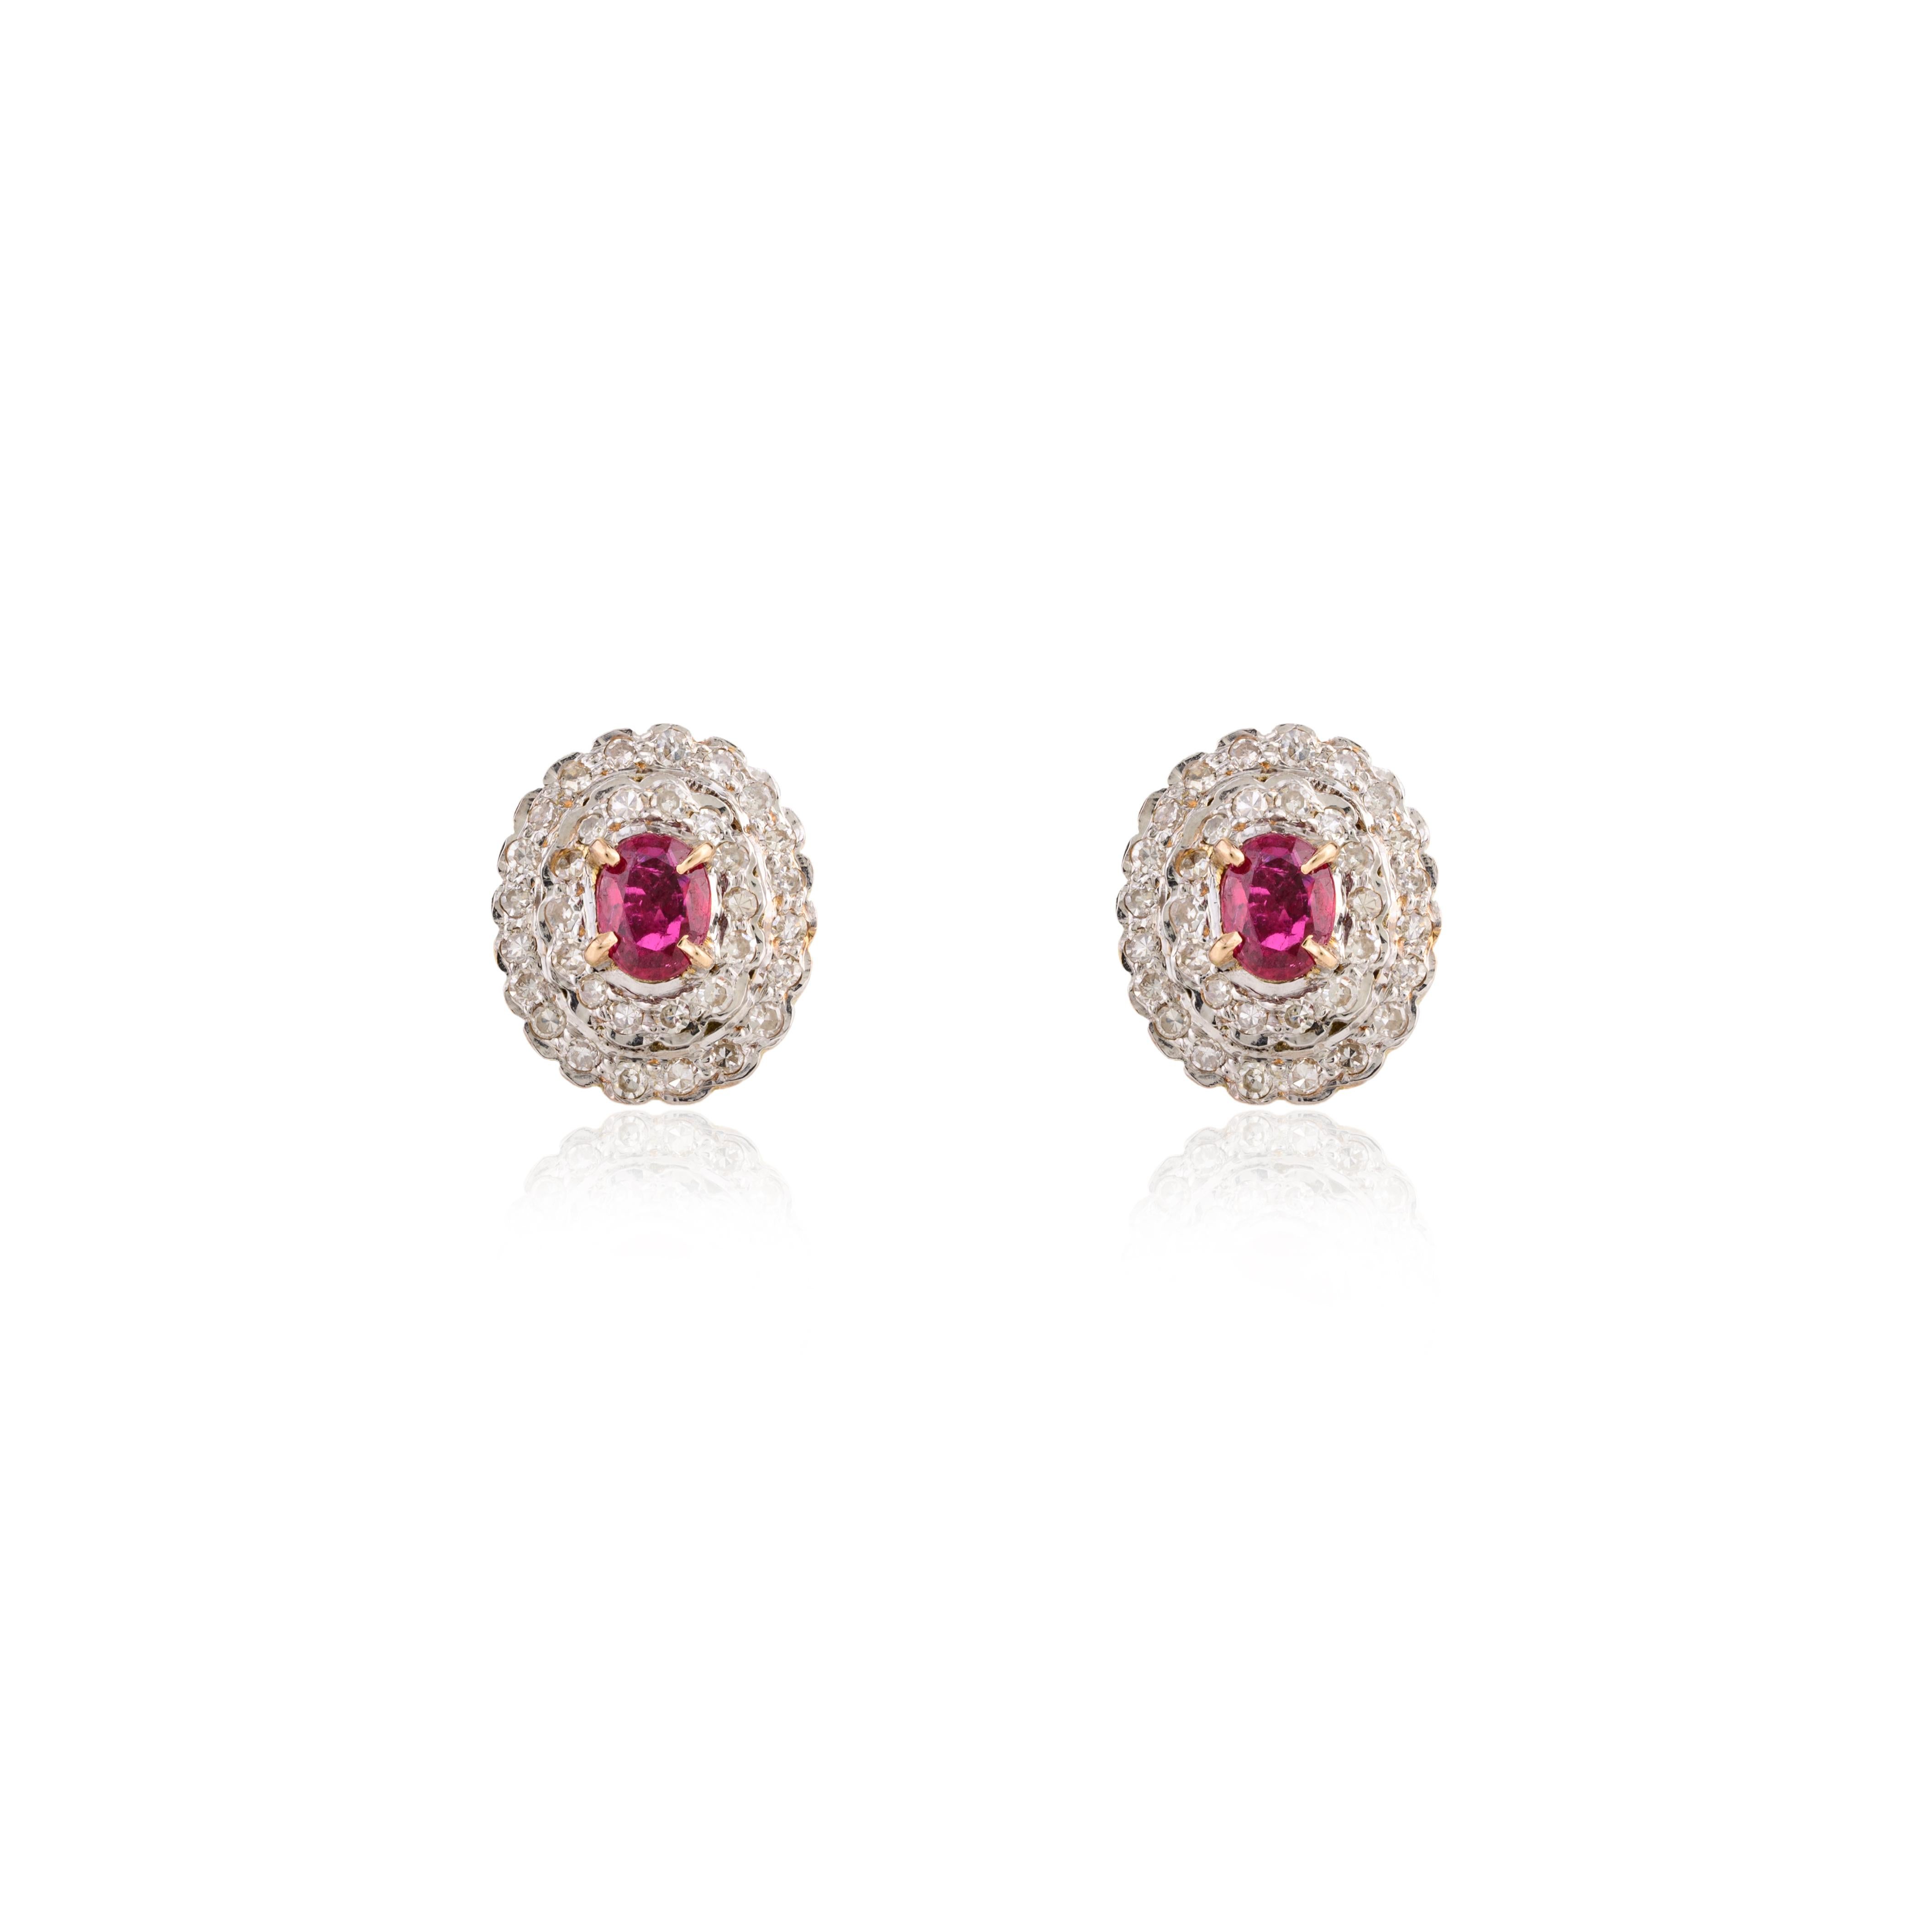 Certified Genuine Ruby and Halo Diamond Wedding Stud Earrings in 14K Gold to make a statement with your look. You shall need stud earrings to make a statement with your look. These earrings create a sparkling, luxurious look featuring oval cut